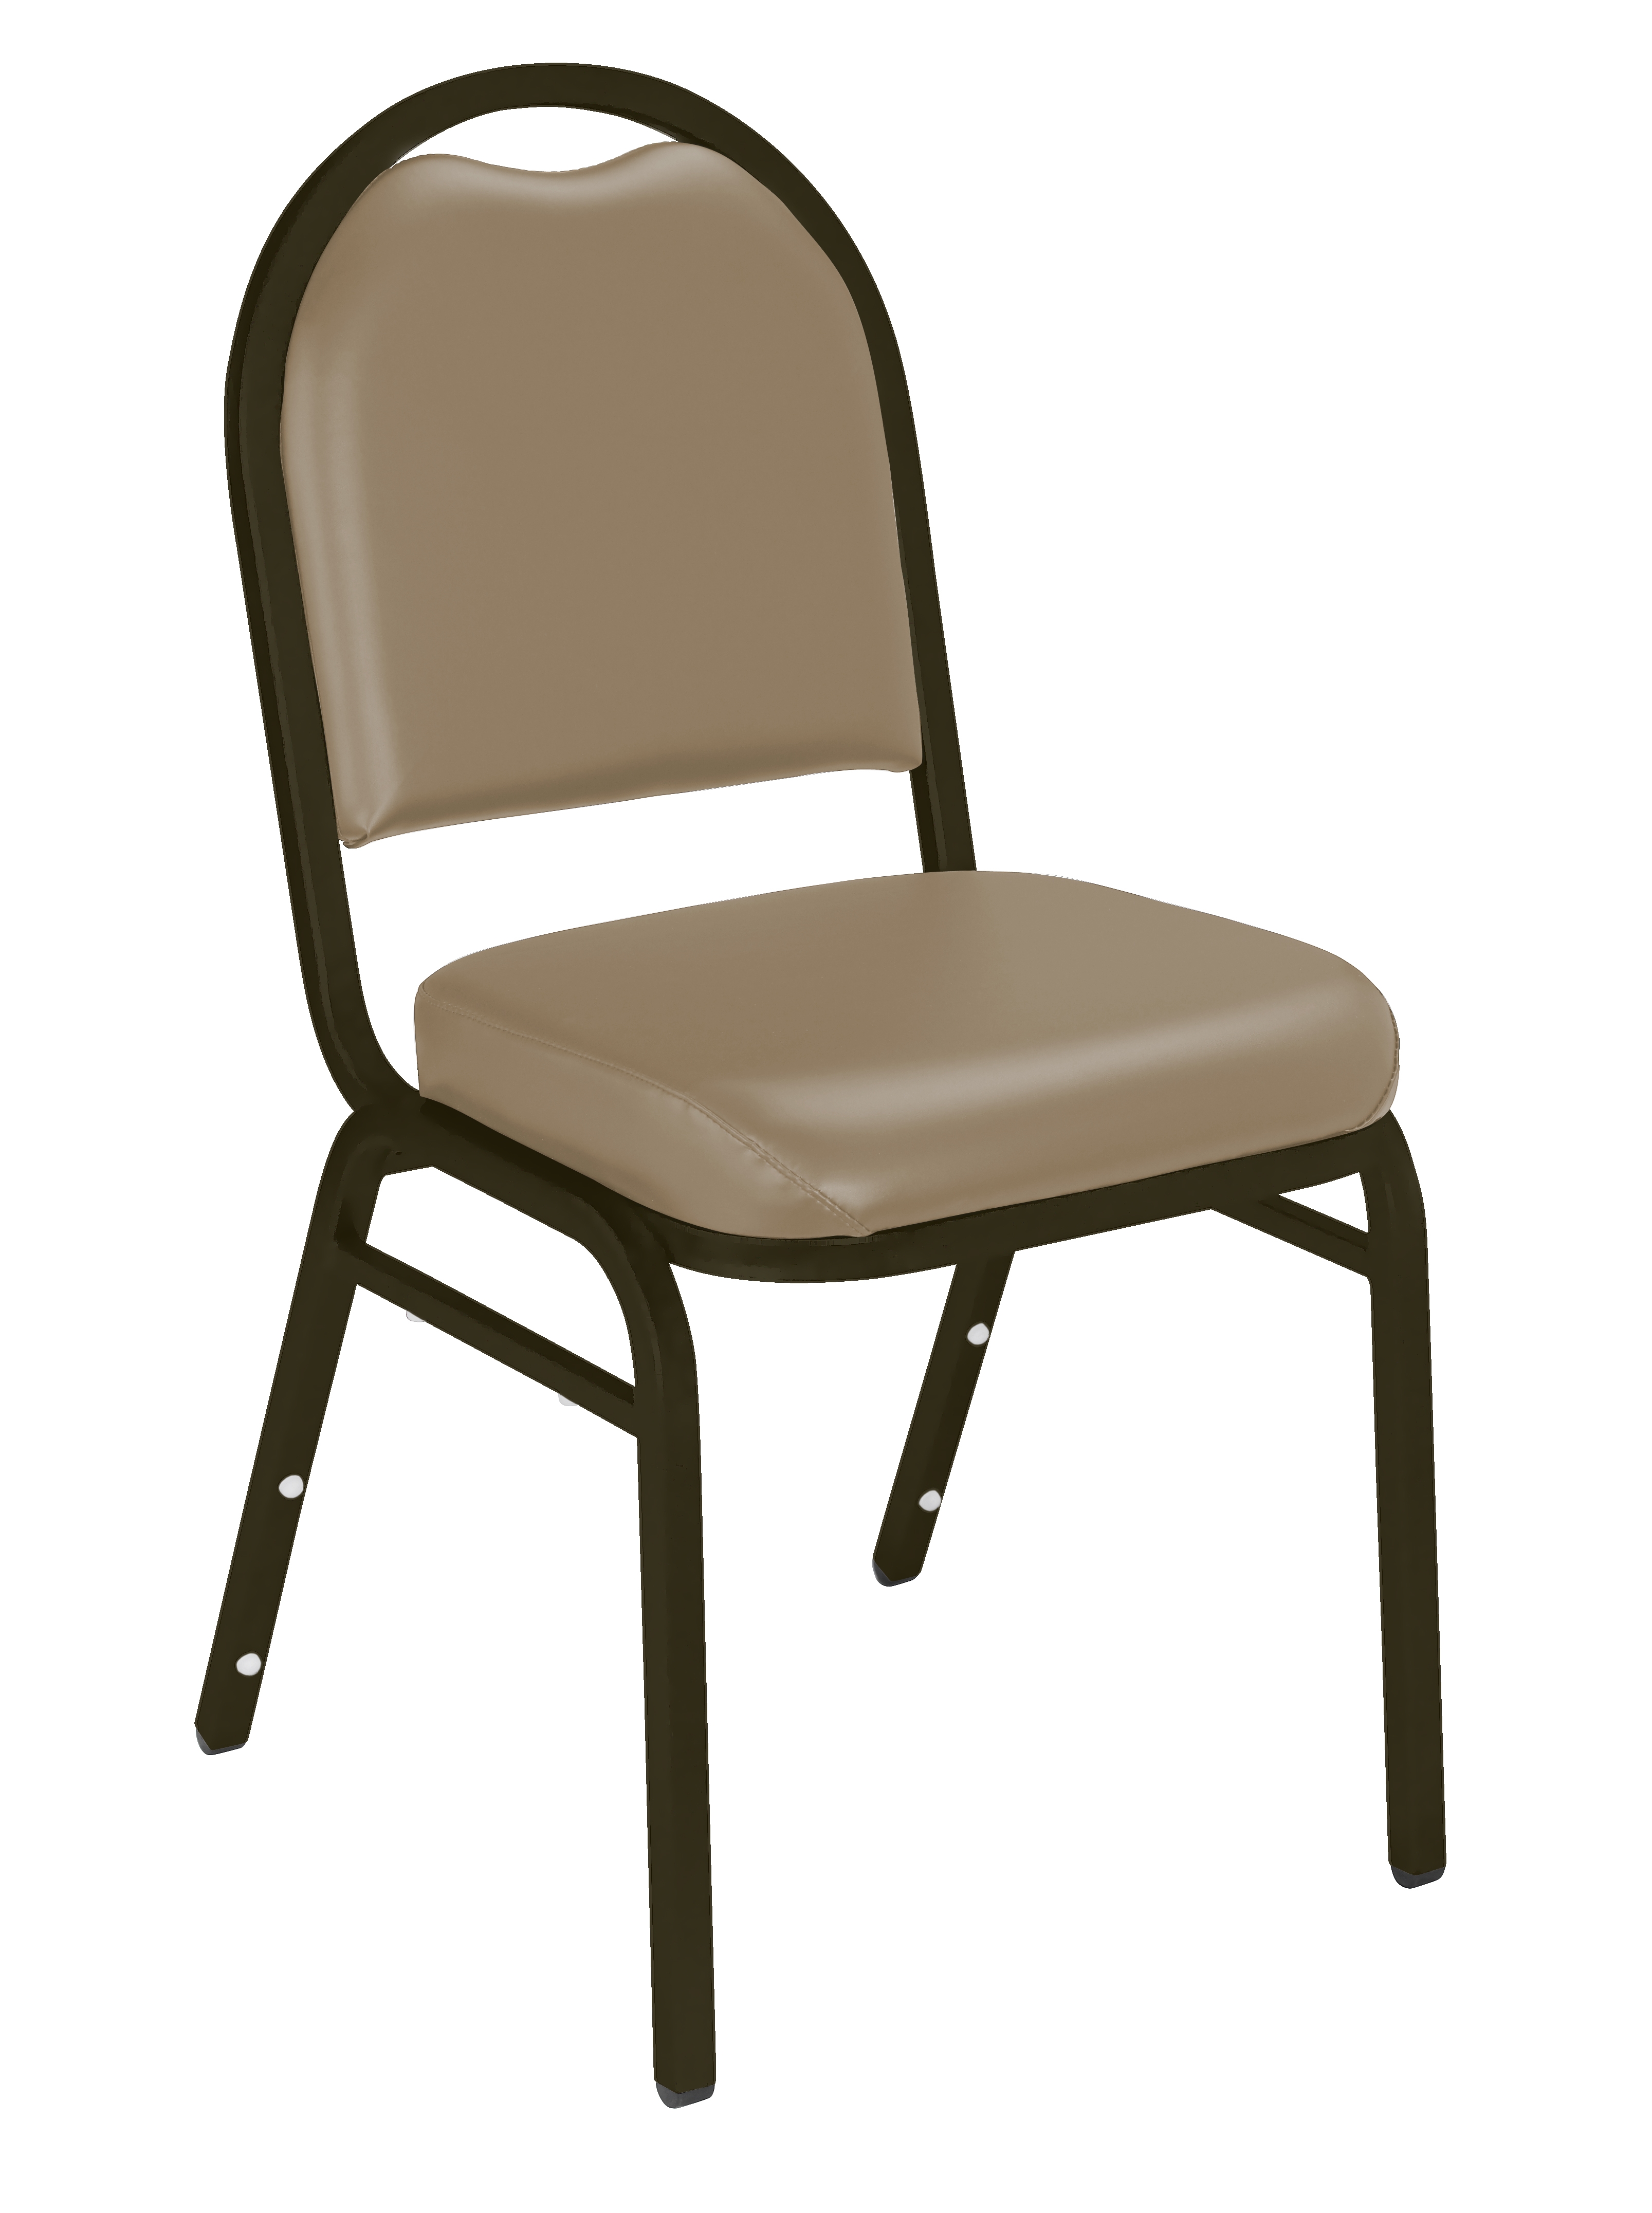 NPS 9201 French Beige Vinyl Stacking Banquet Chair Sale